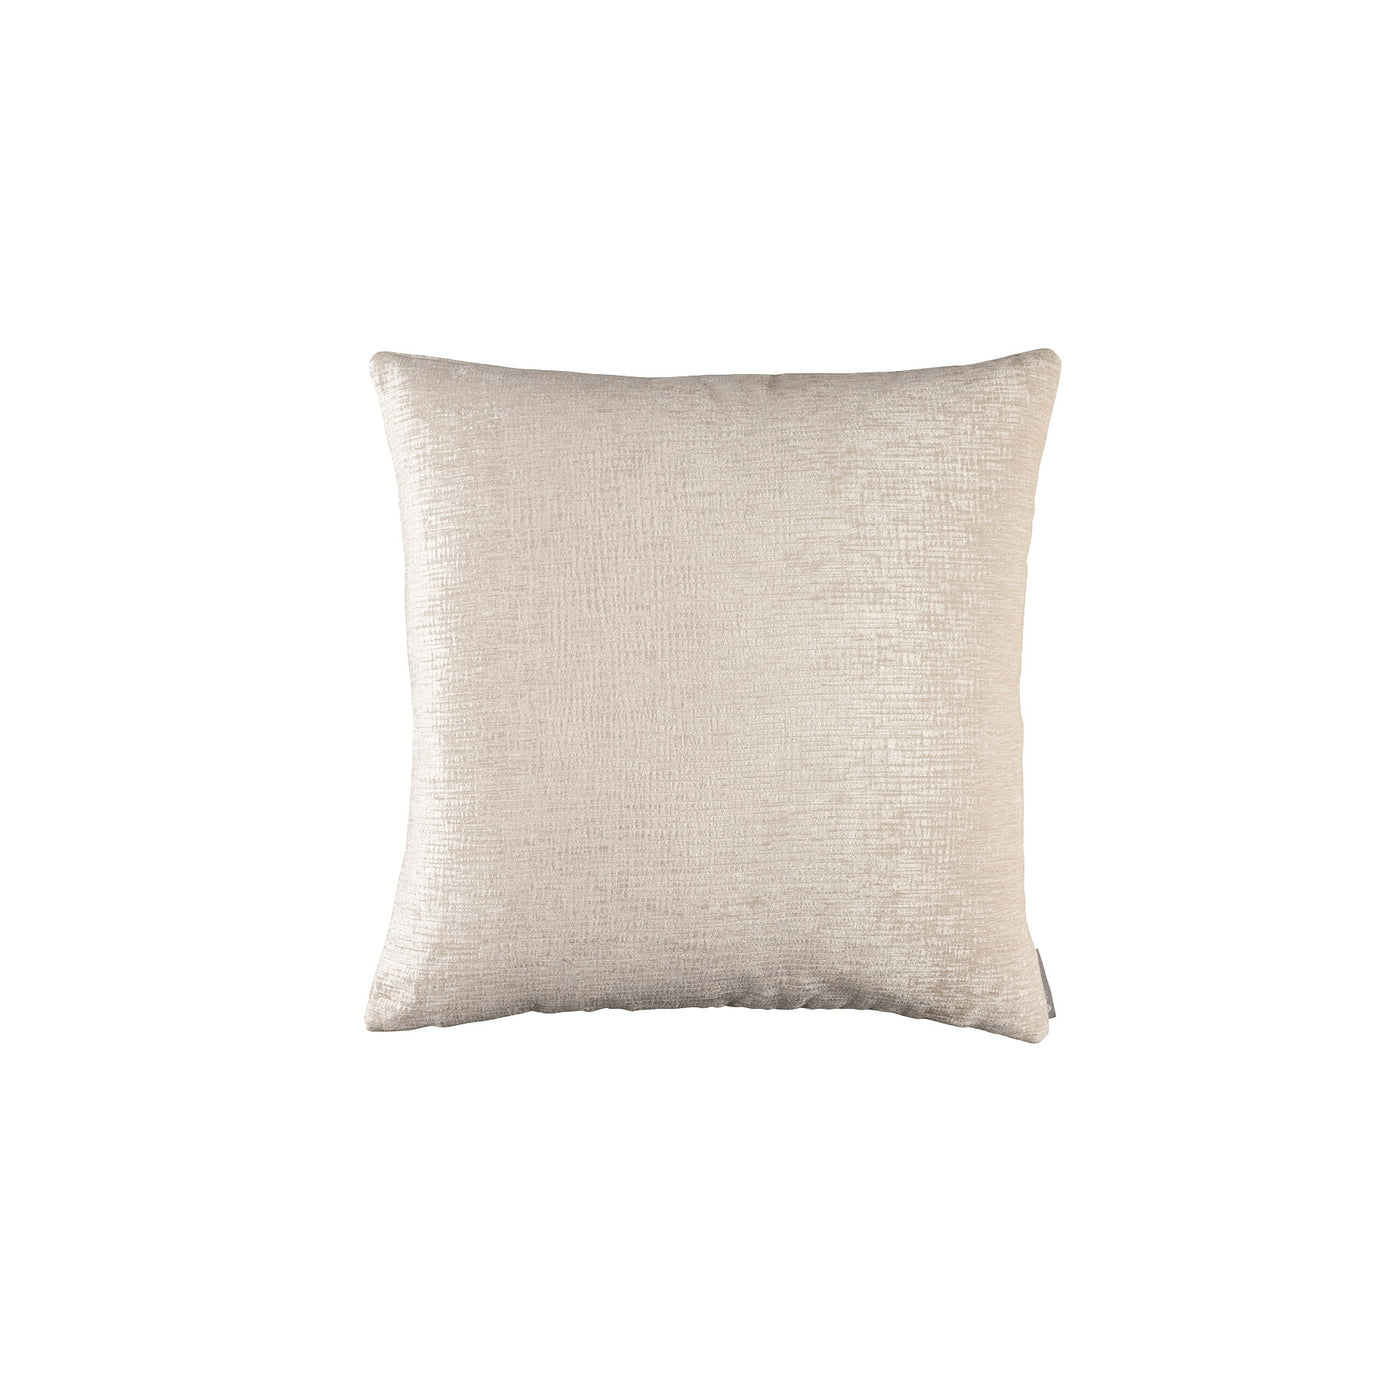 Ava Ivory Small Square Pillow (22x22)